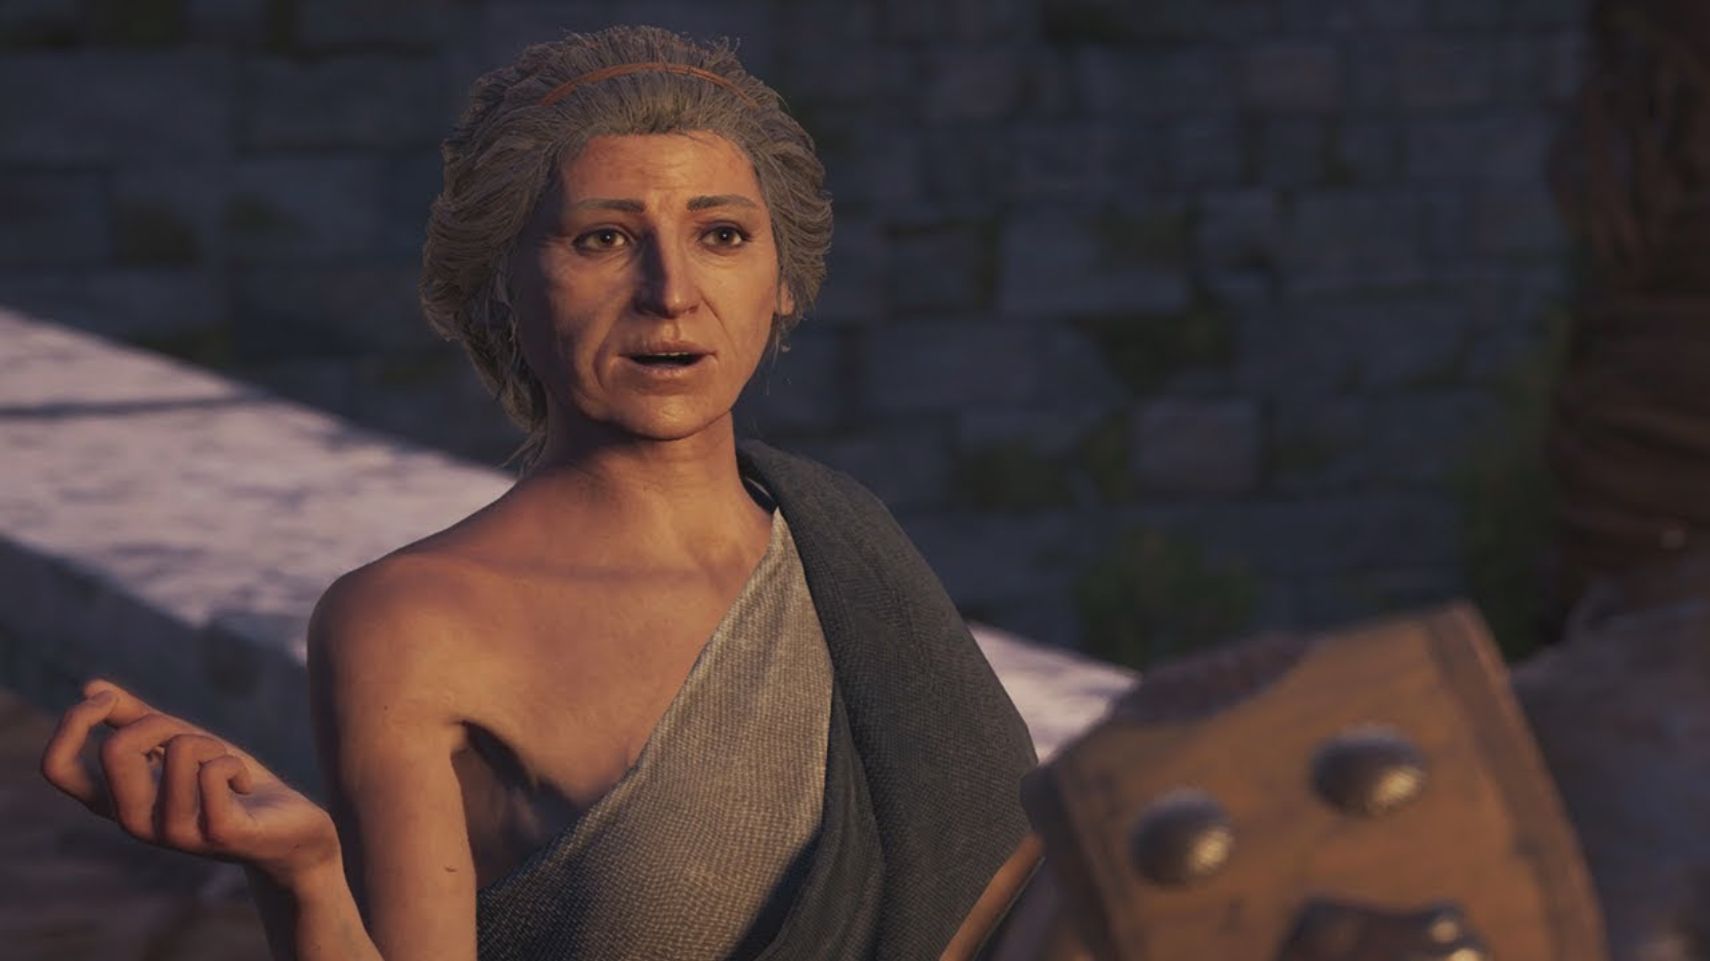 Assassin's Creed Odyssey Age is Just a Number side quest